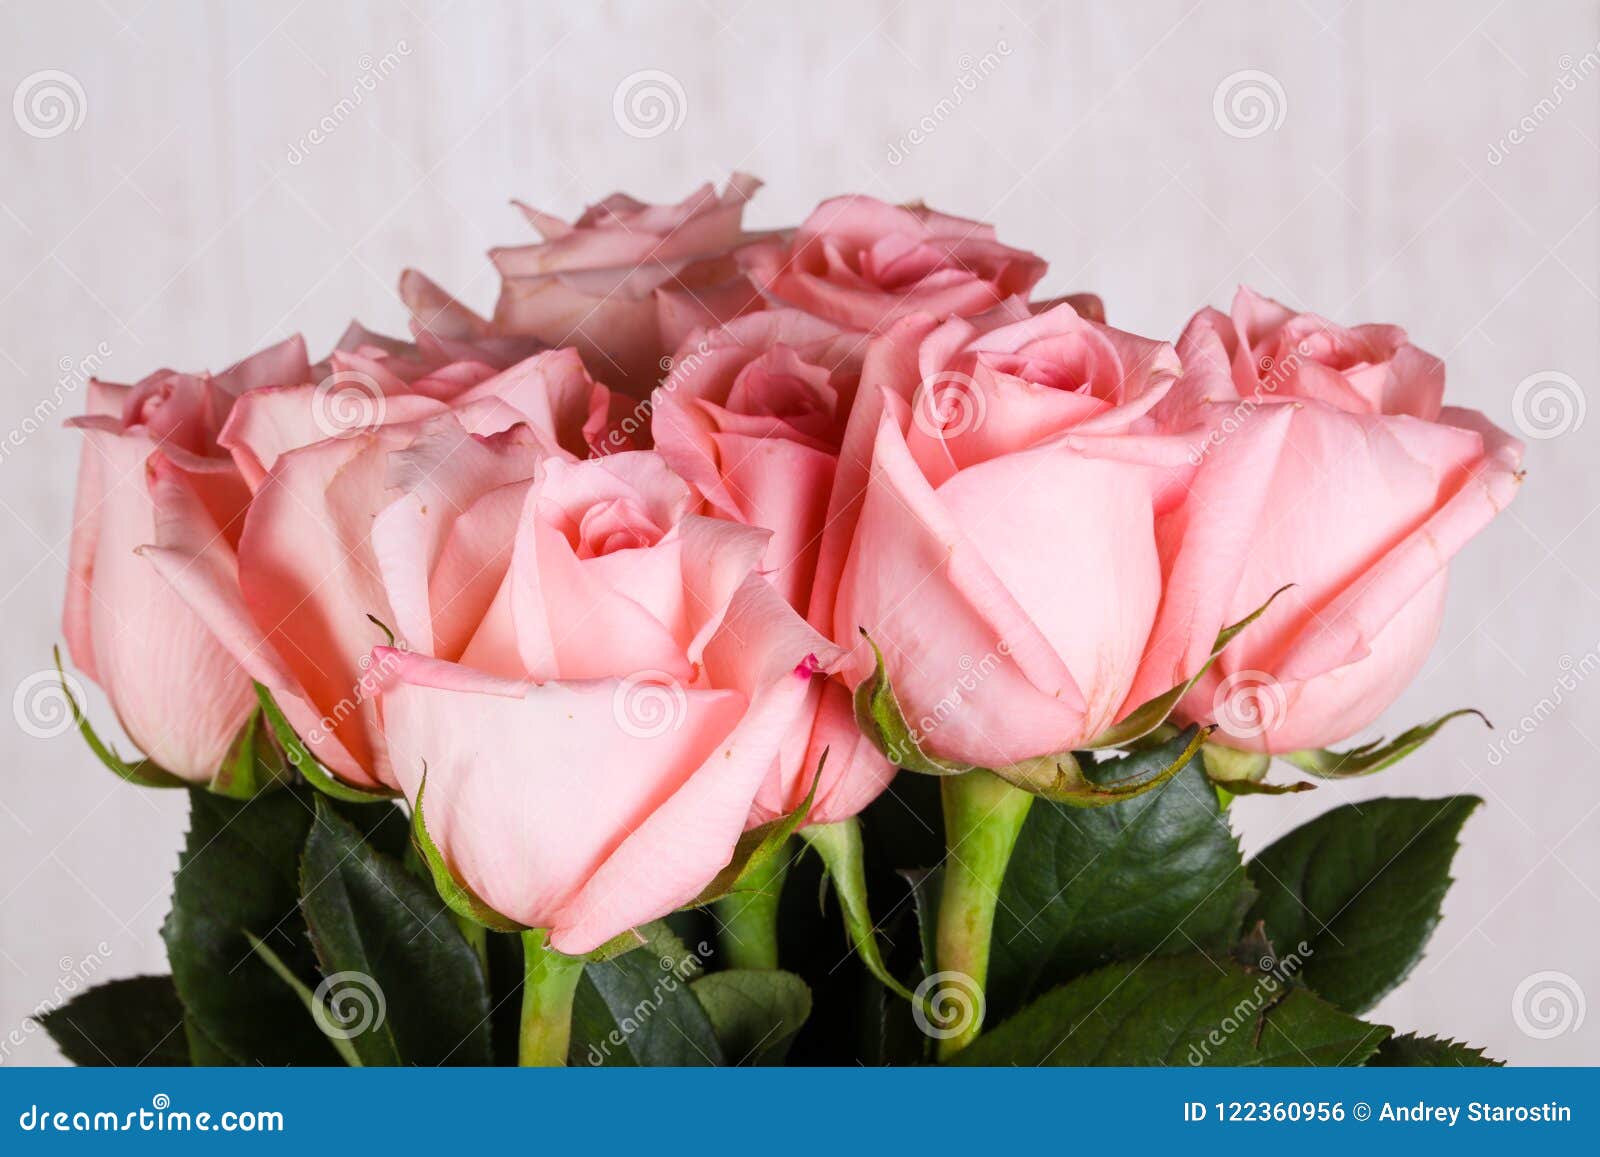 Pink roses bouquet stock photo. Image of pink, gift - 122360956